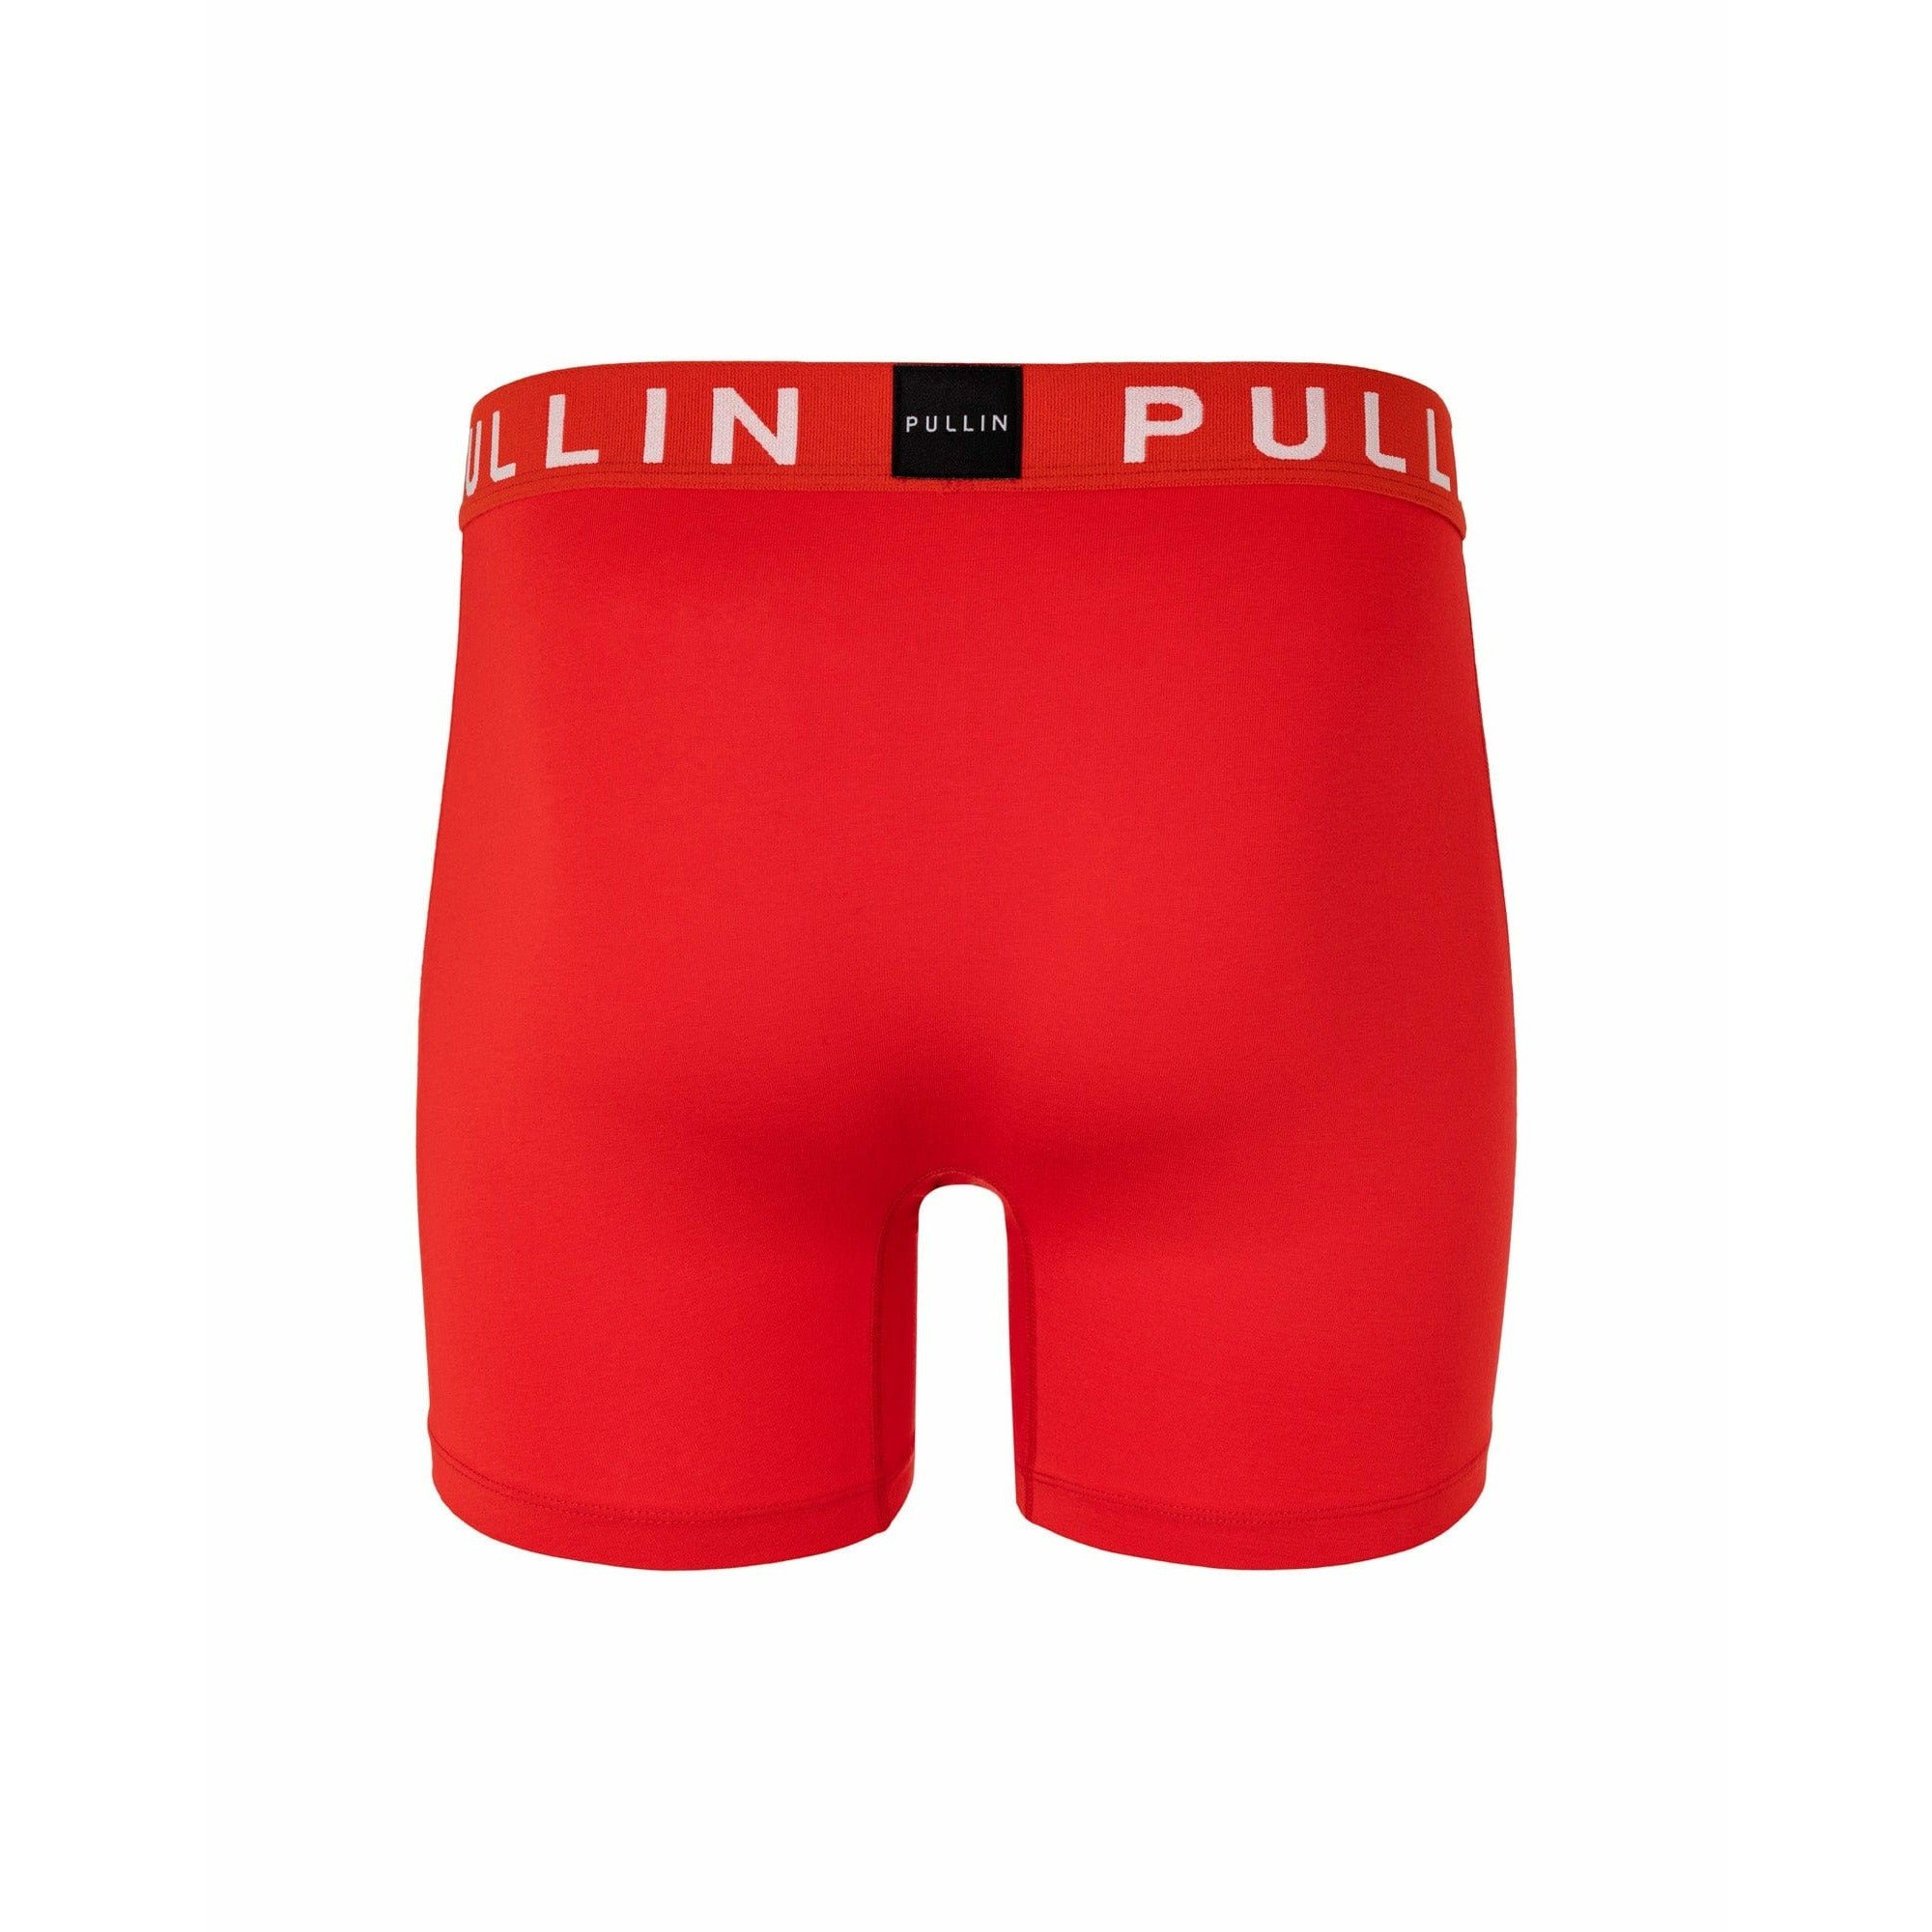 Pullin Red / S Fashion 2 Red21 Boxer Brief